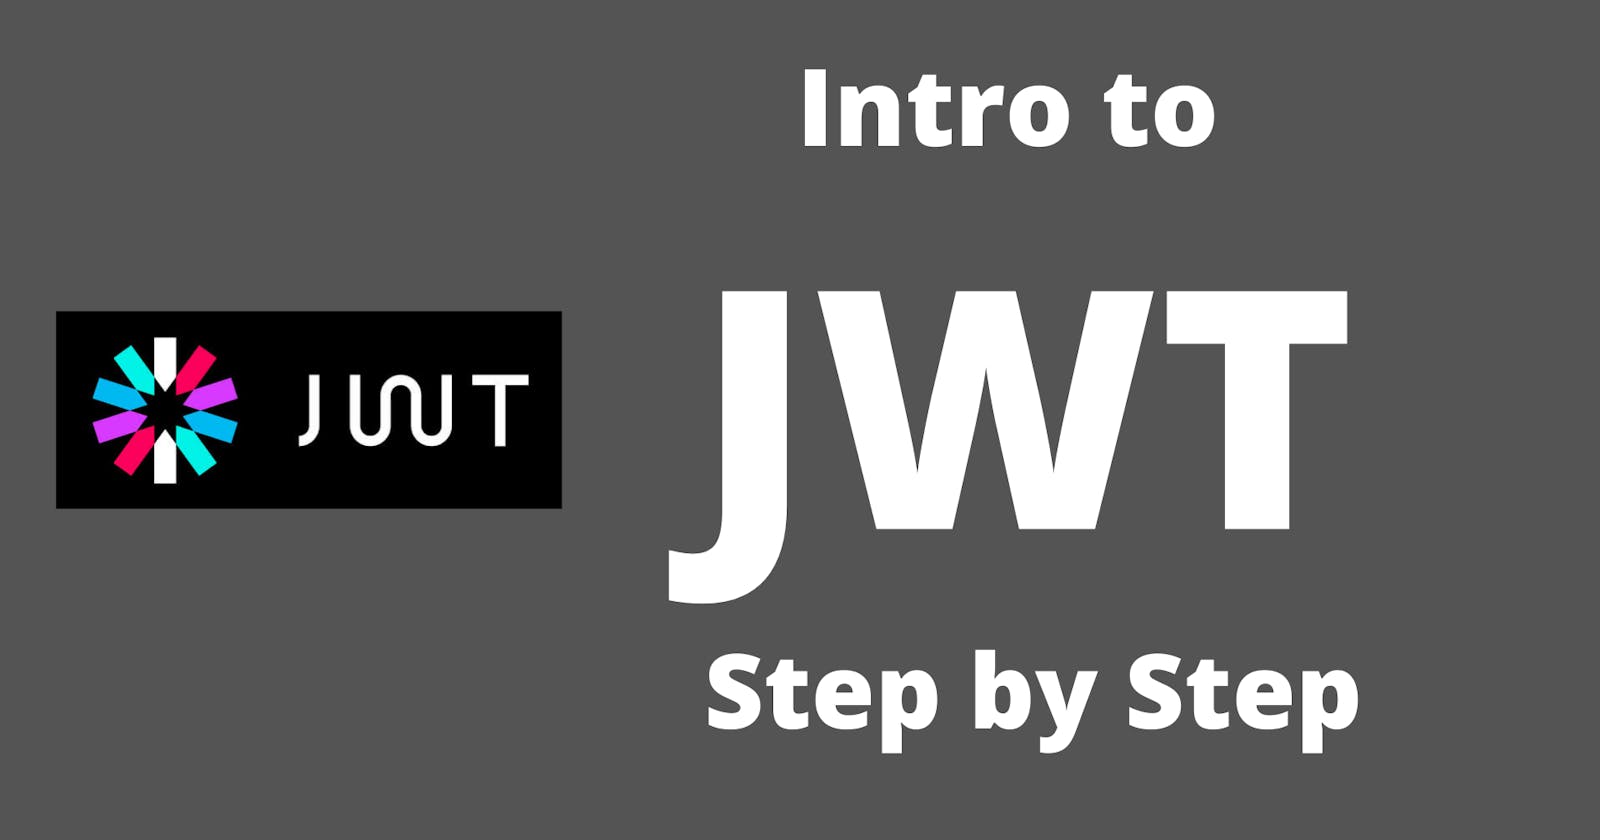 Intro to JWT - Step by Step